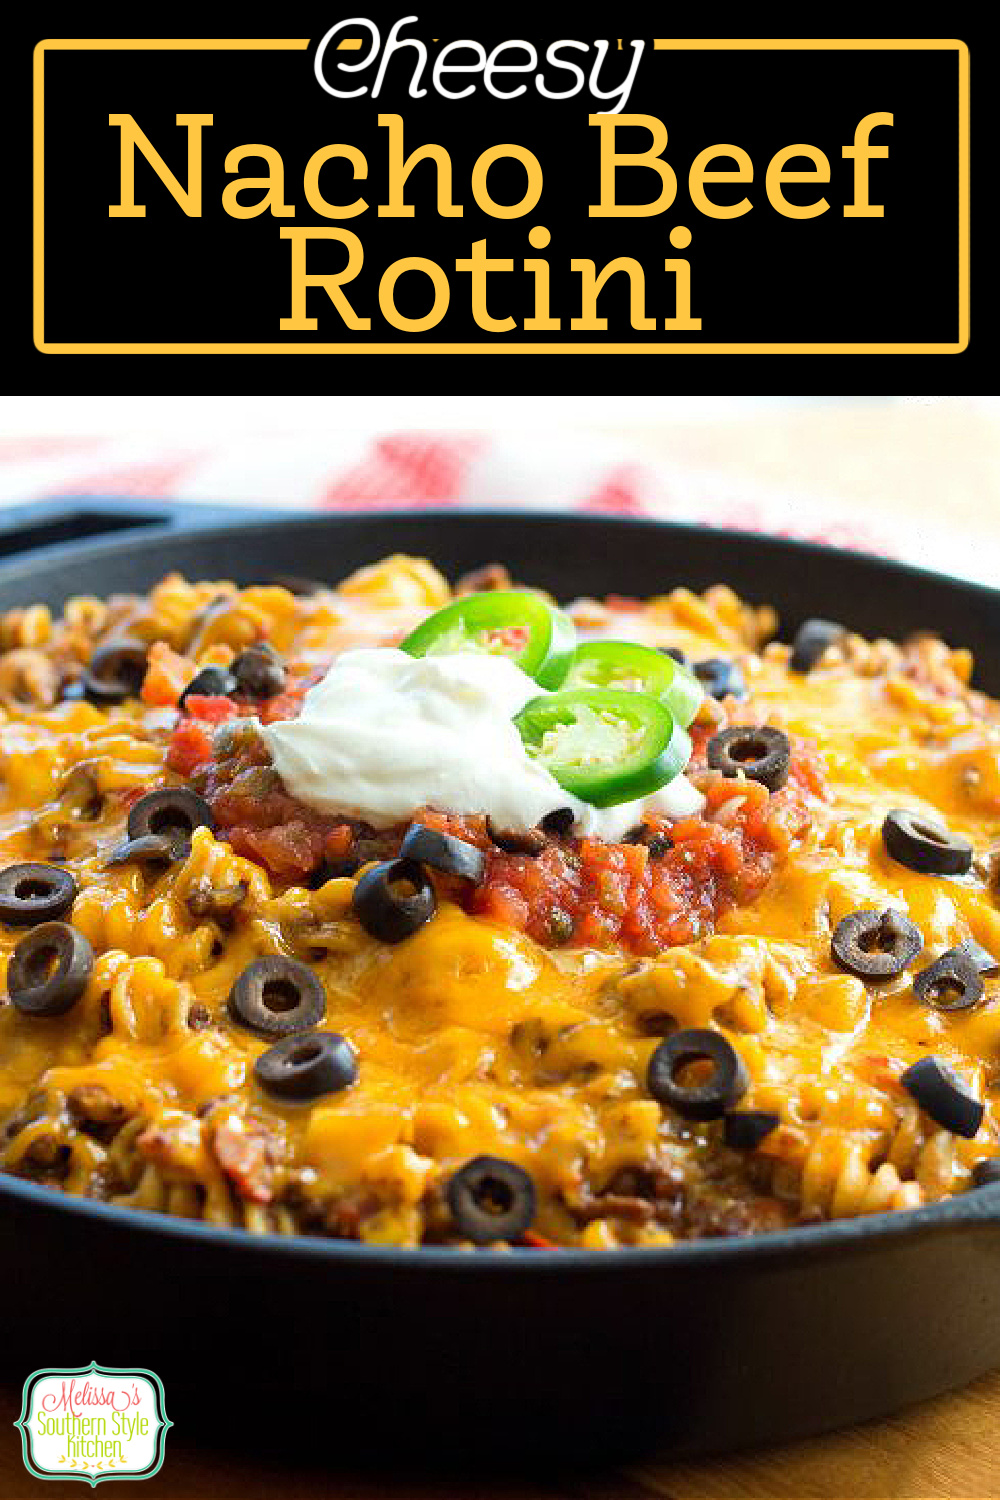 The family will love this Cheesy Nacho Beef Rotini for dinner any night of the week #nachos #nachobeef #cheesynachos #rotini #pasta #nachopastarecipes #dinner #easygroundbeefrecipes #beef #dinnerideas #tacotuewsday #southernfood #southernrecipes #castironcooking via @melissasssk